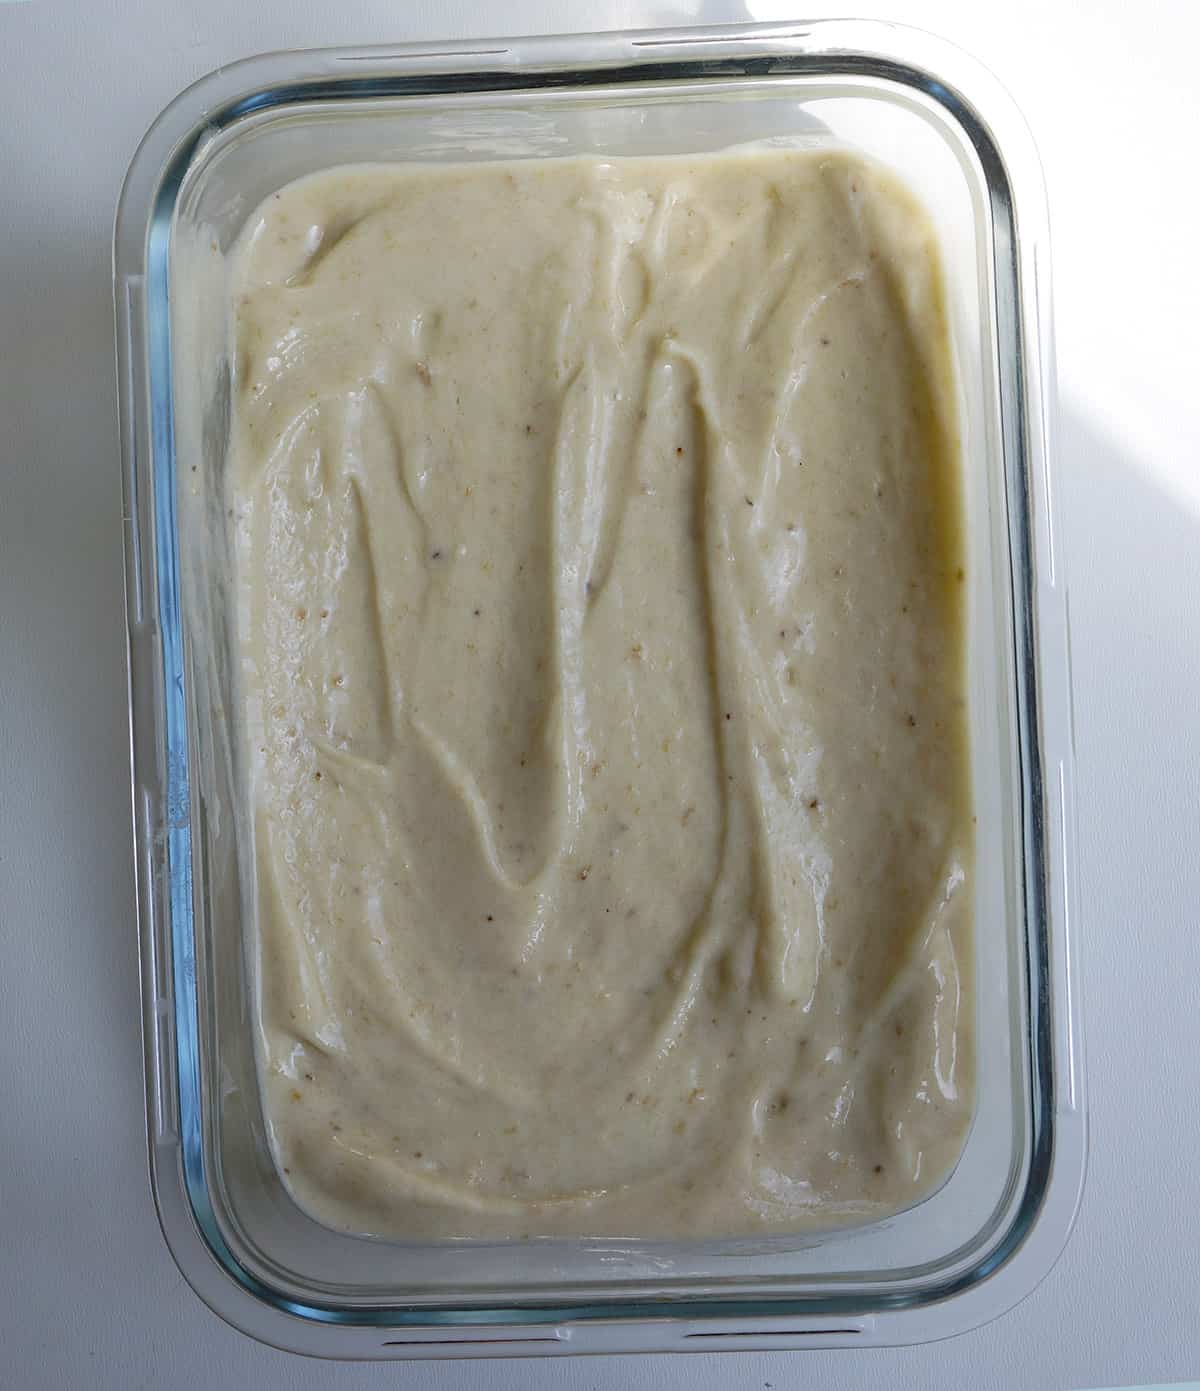 Spread out Nice Cream in Freezer Dish